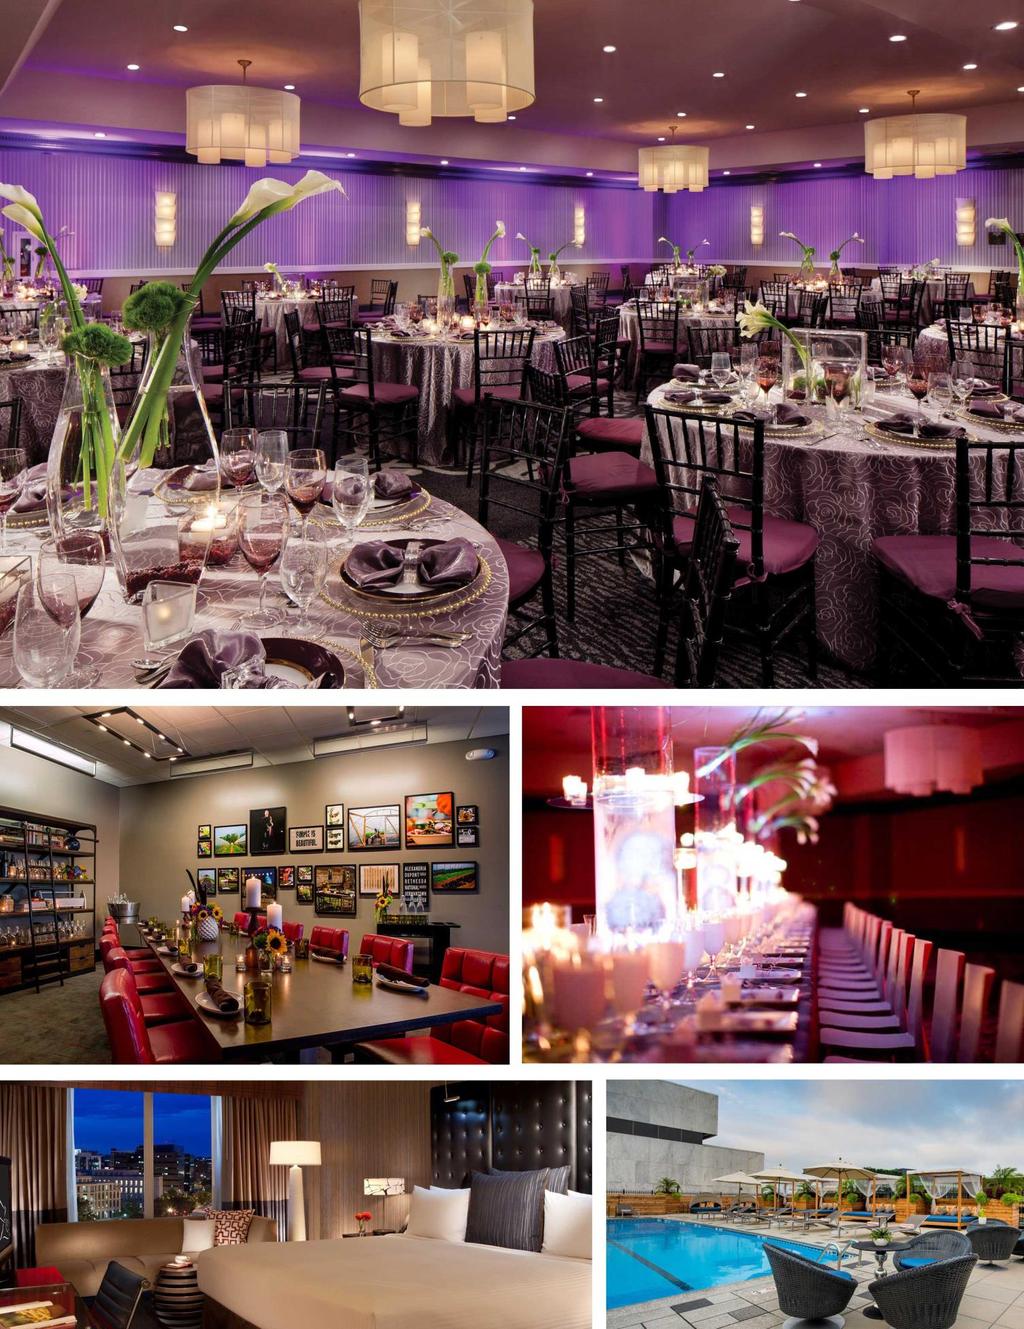 A vision for a wedding day reception